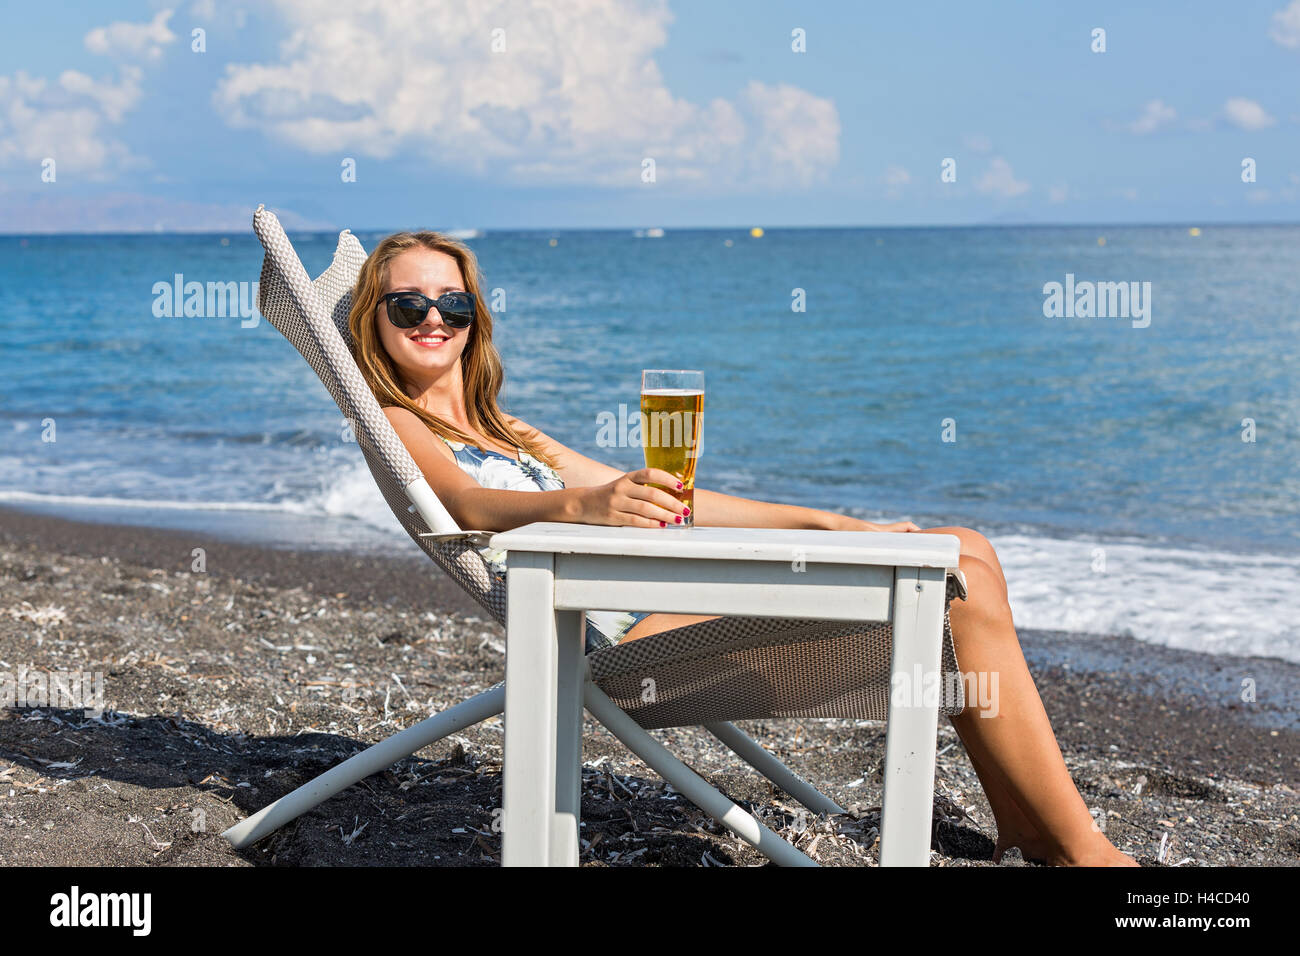 Beautiful young woman sunbathing on a lounger on the beach Stock Photo